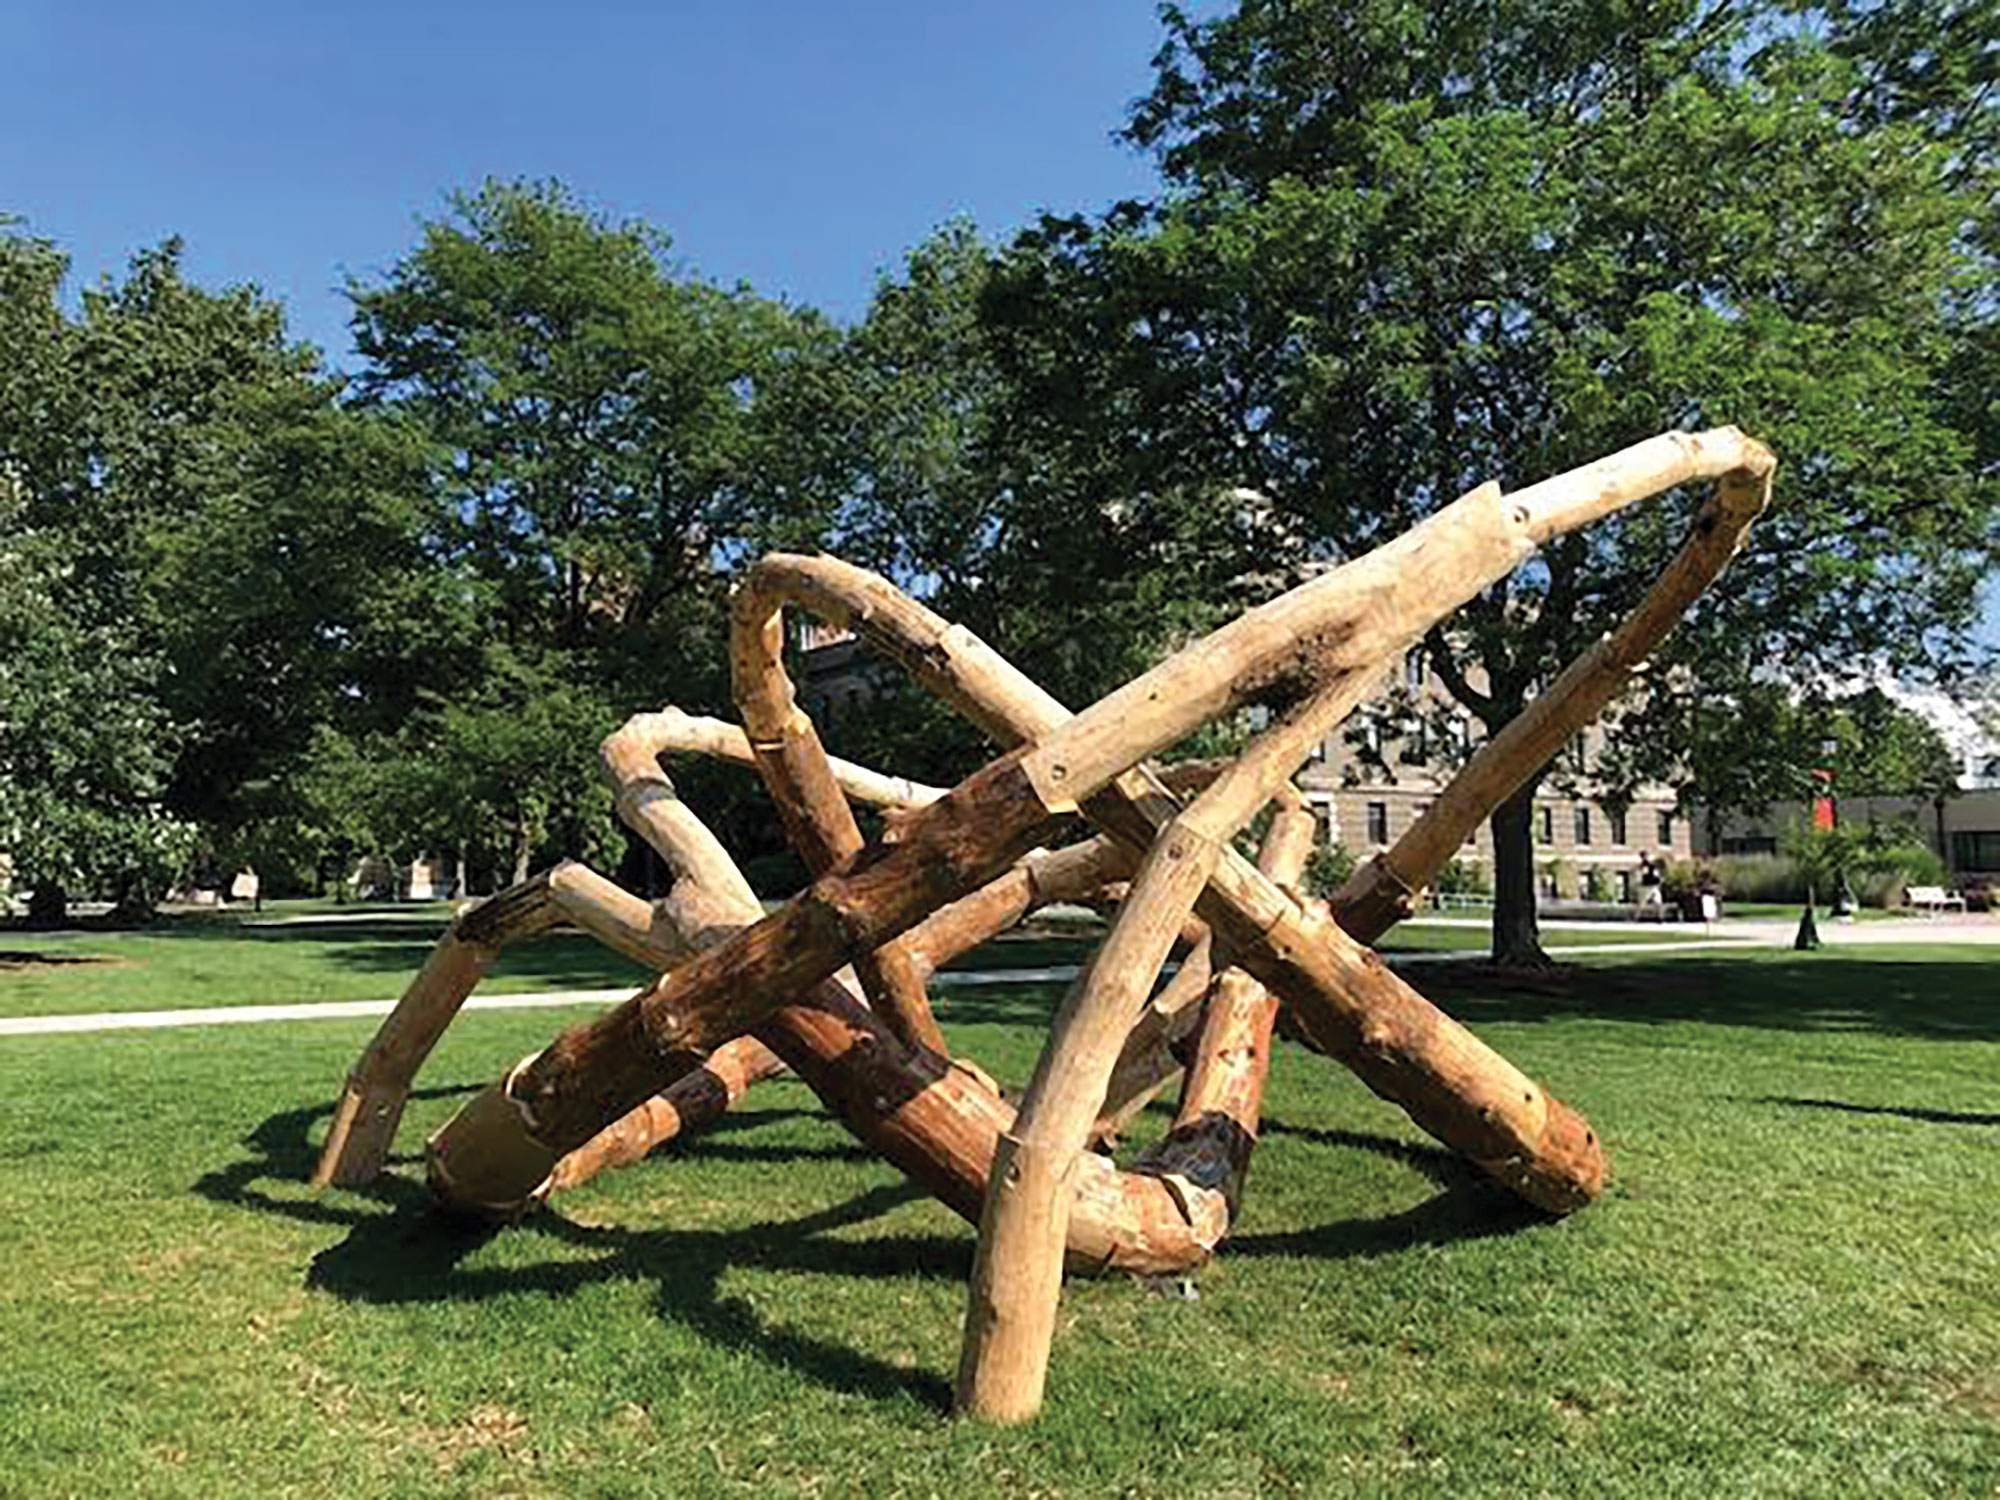 The LOG KNOT installation is composed of irregularly-shaped logs connected in a twisting design. BreAnne Fleer / Sun News Editor